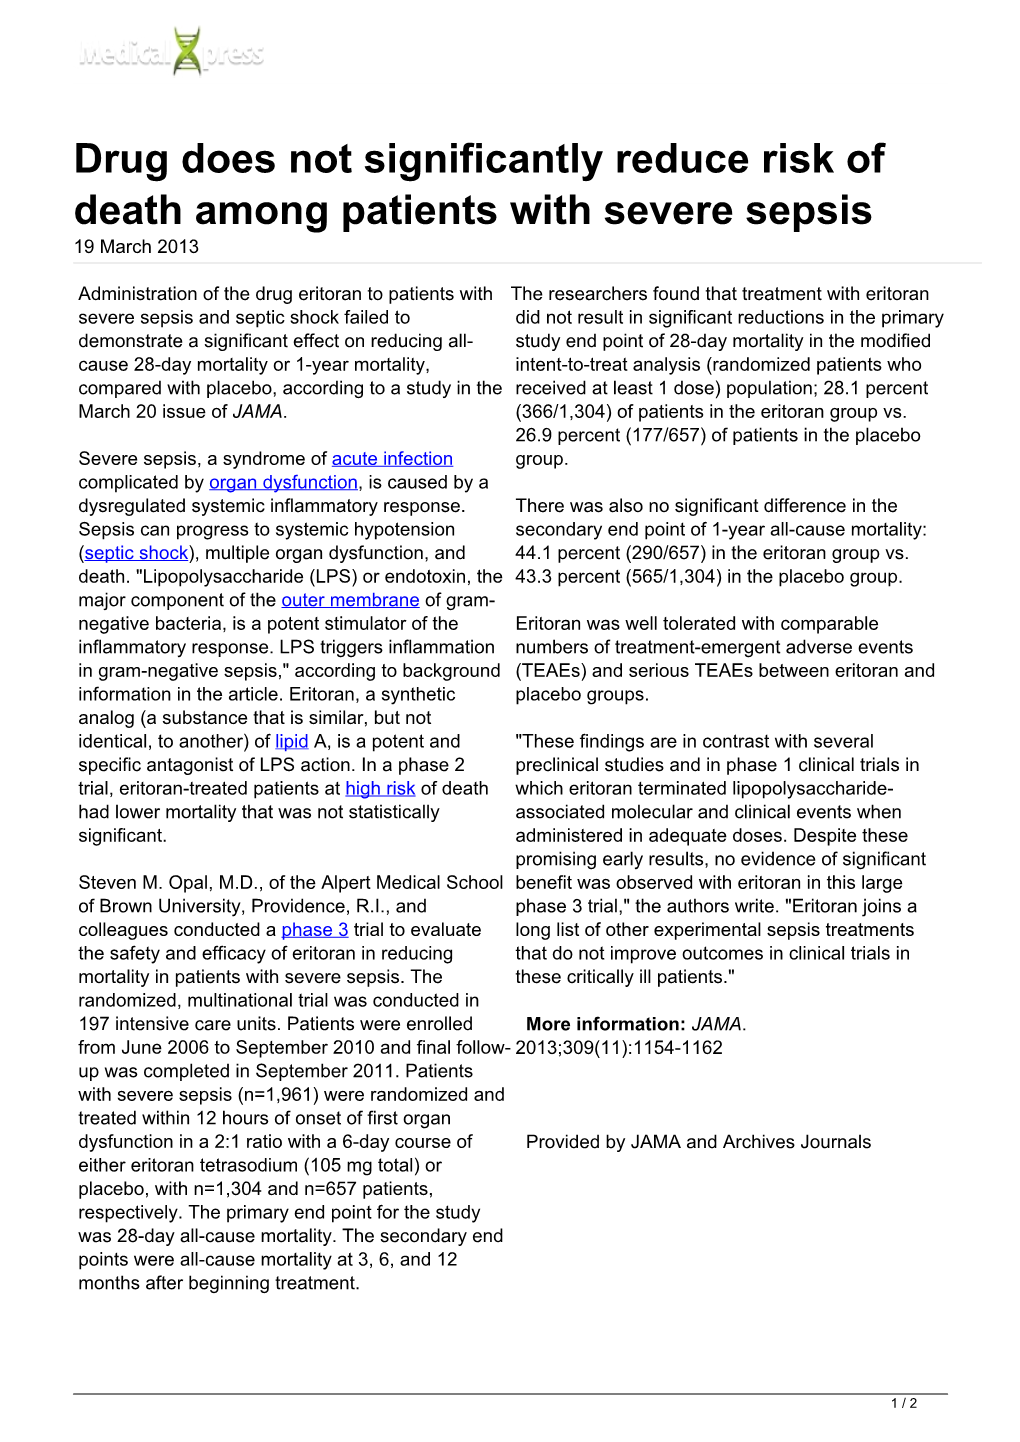 Drug Does Not Significantly Reduce Risk of Death Among Patients with Severe Sepsis 19 March 2013